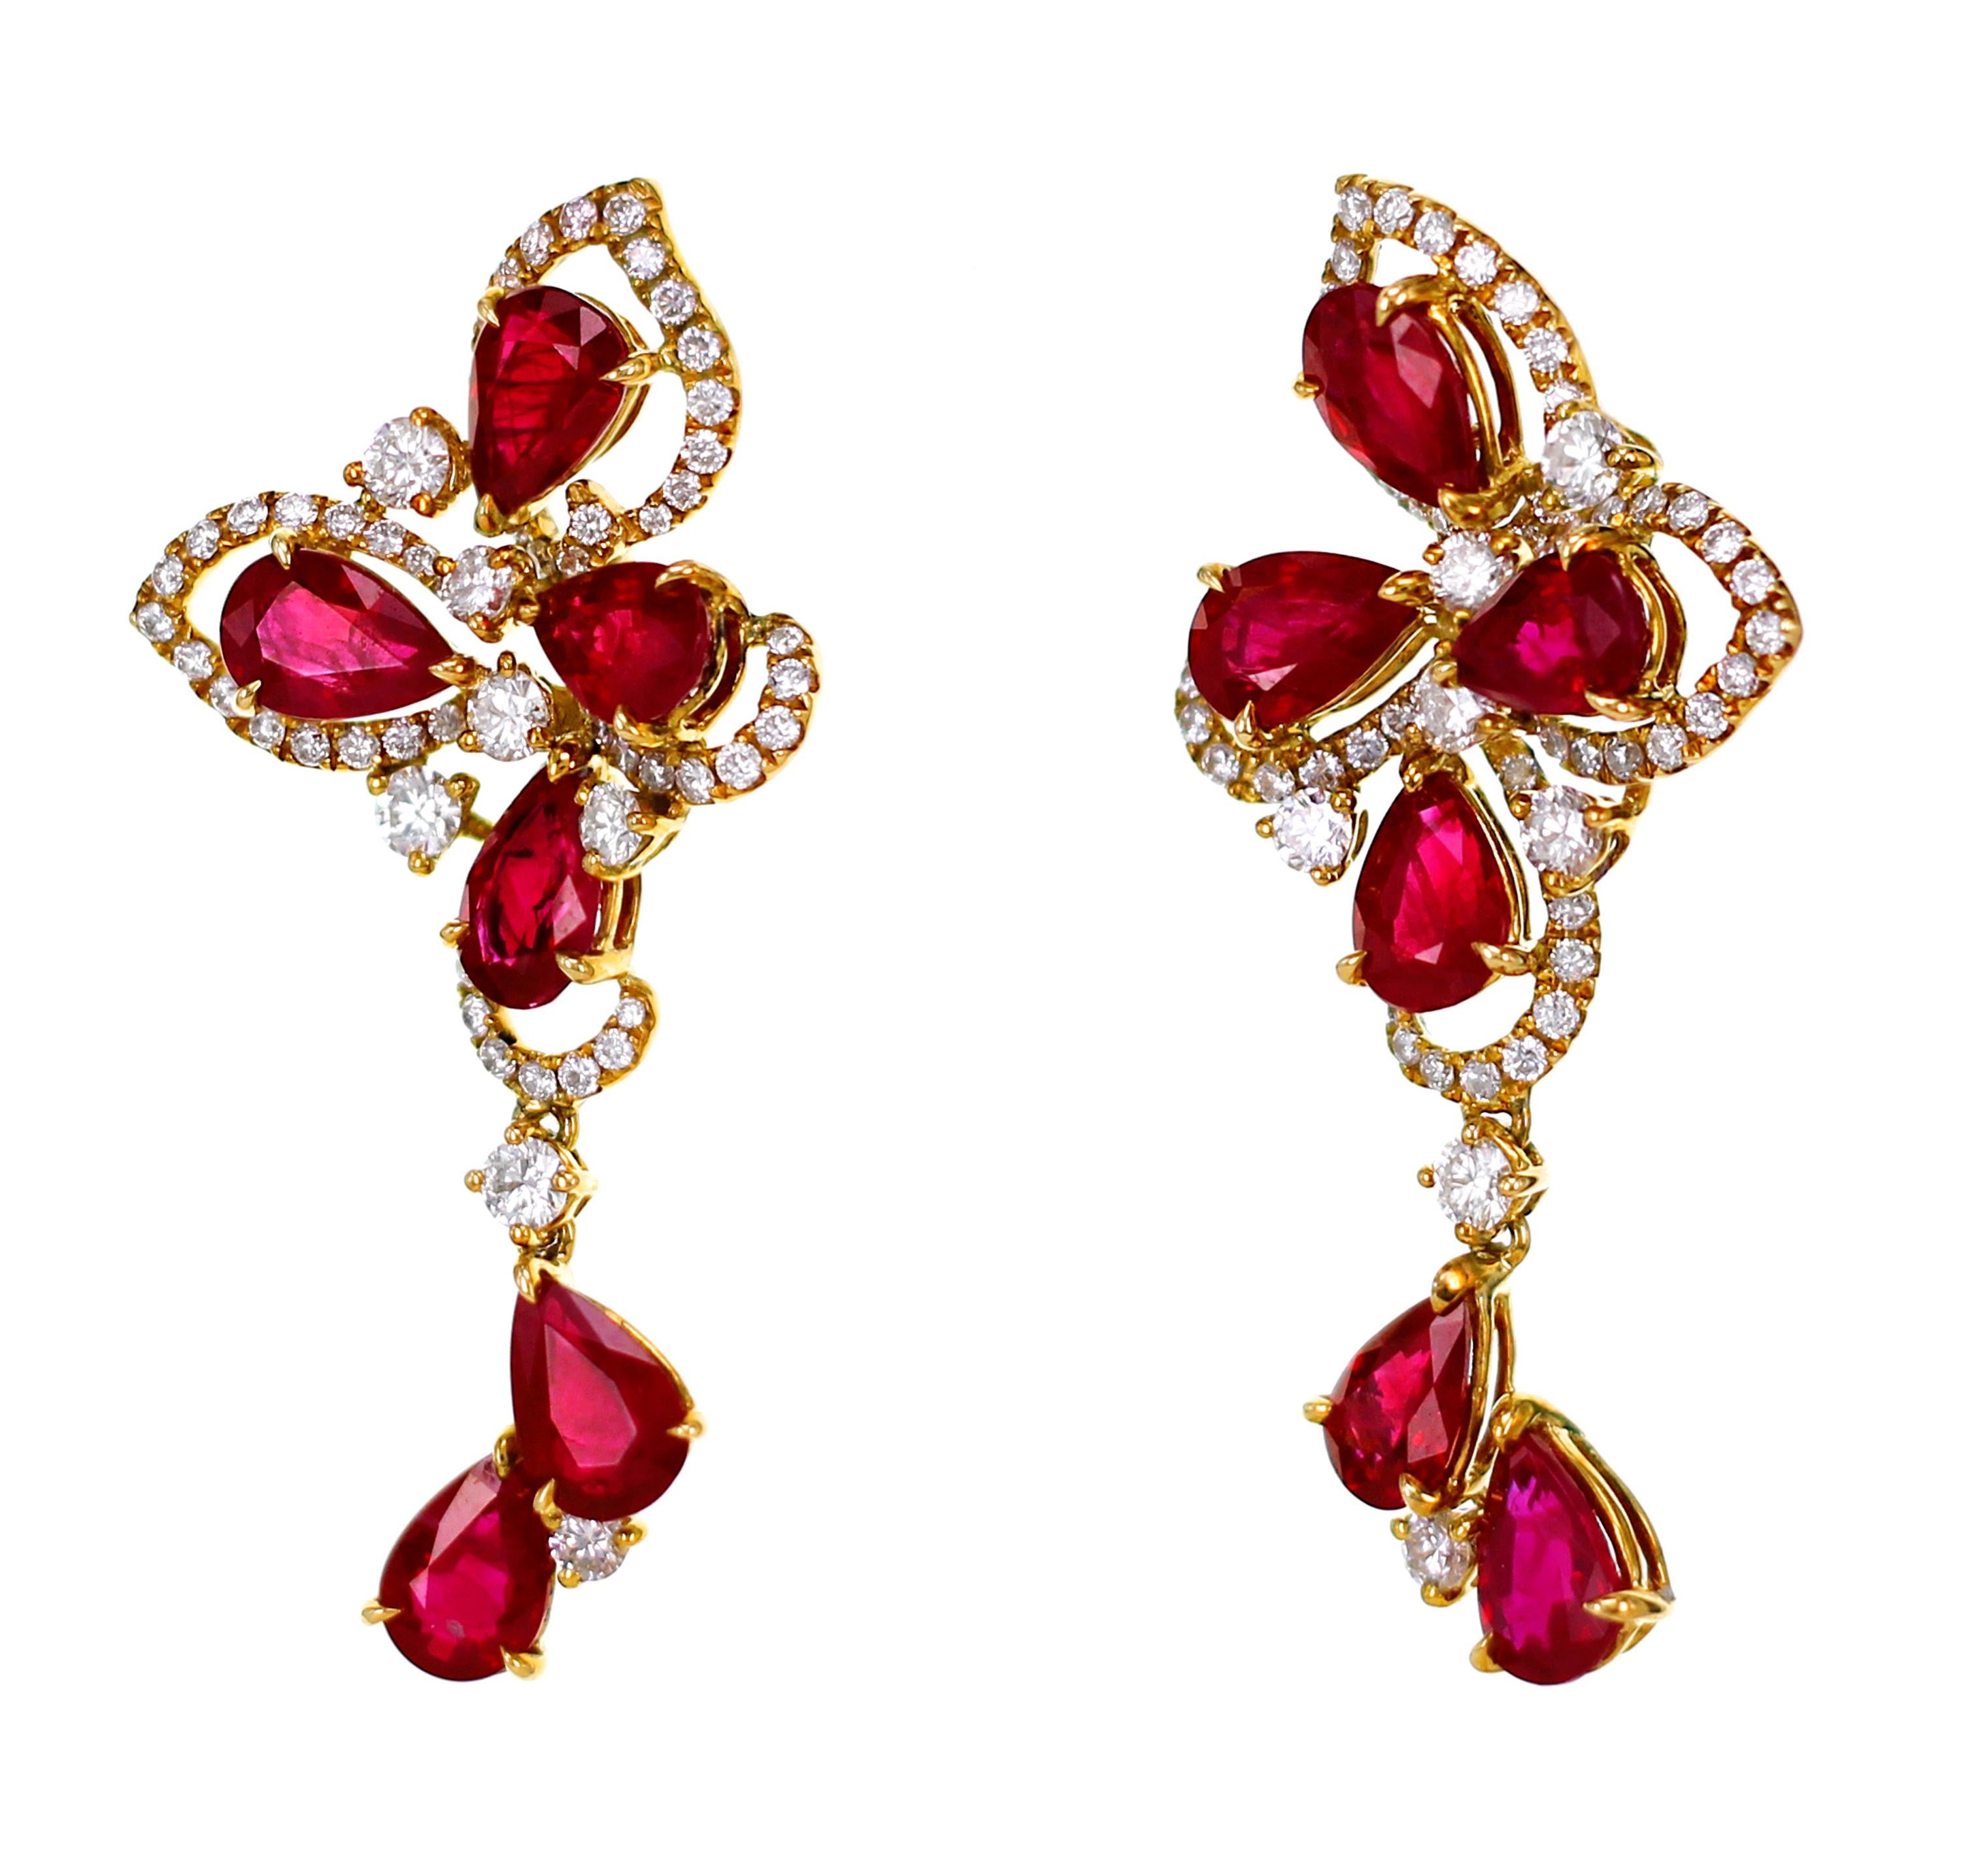 5.80 carat of ruby is studded with 1.07 carat of white brilliant diamond in this beautiful cocktail earring. The dangle earring is specially made in yellow gold to give a subtle contrast with the rubies.